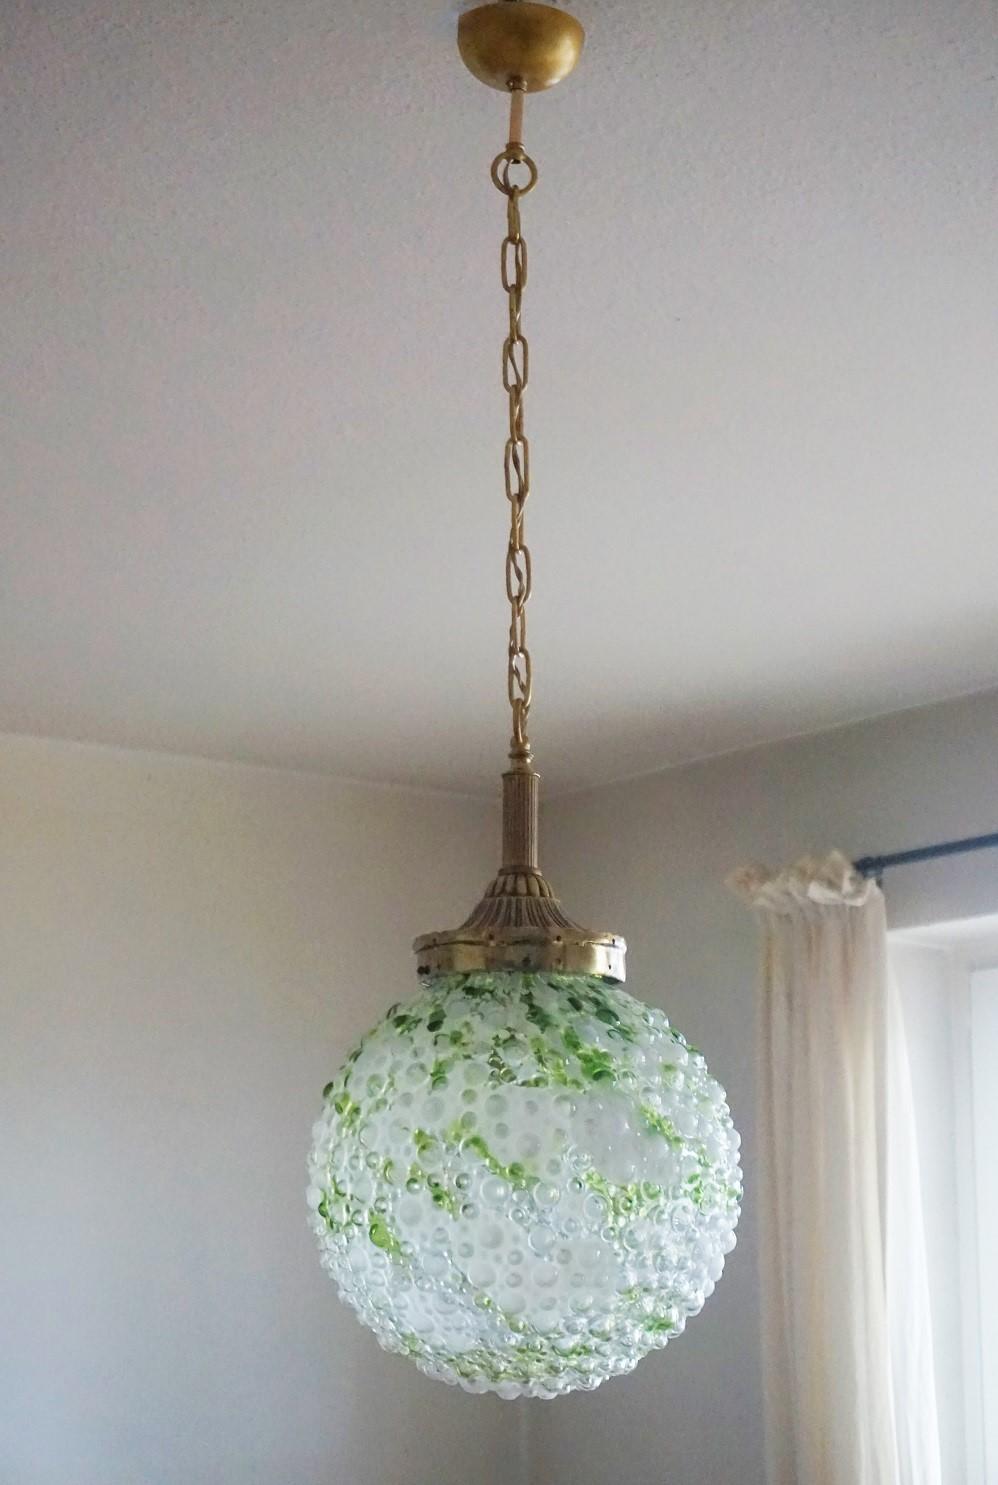 A Murano white and green glass pendant with solid brass mounts and thick and heavy glass ball, Italy, 1950s. 
One E27 light socket for a large sized bulb up to 100Watt.
This wonderful light fixture is in very good condition, aged patina to brass, no